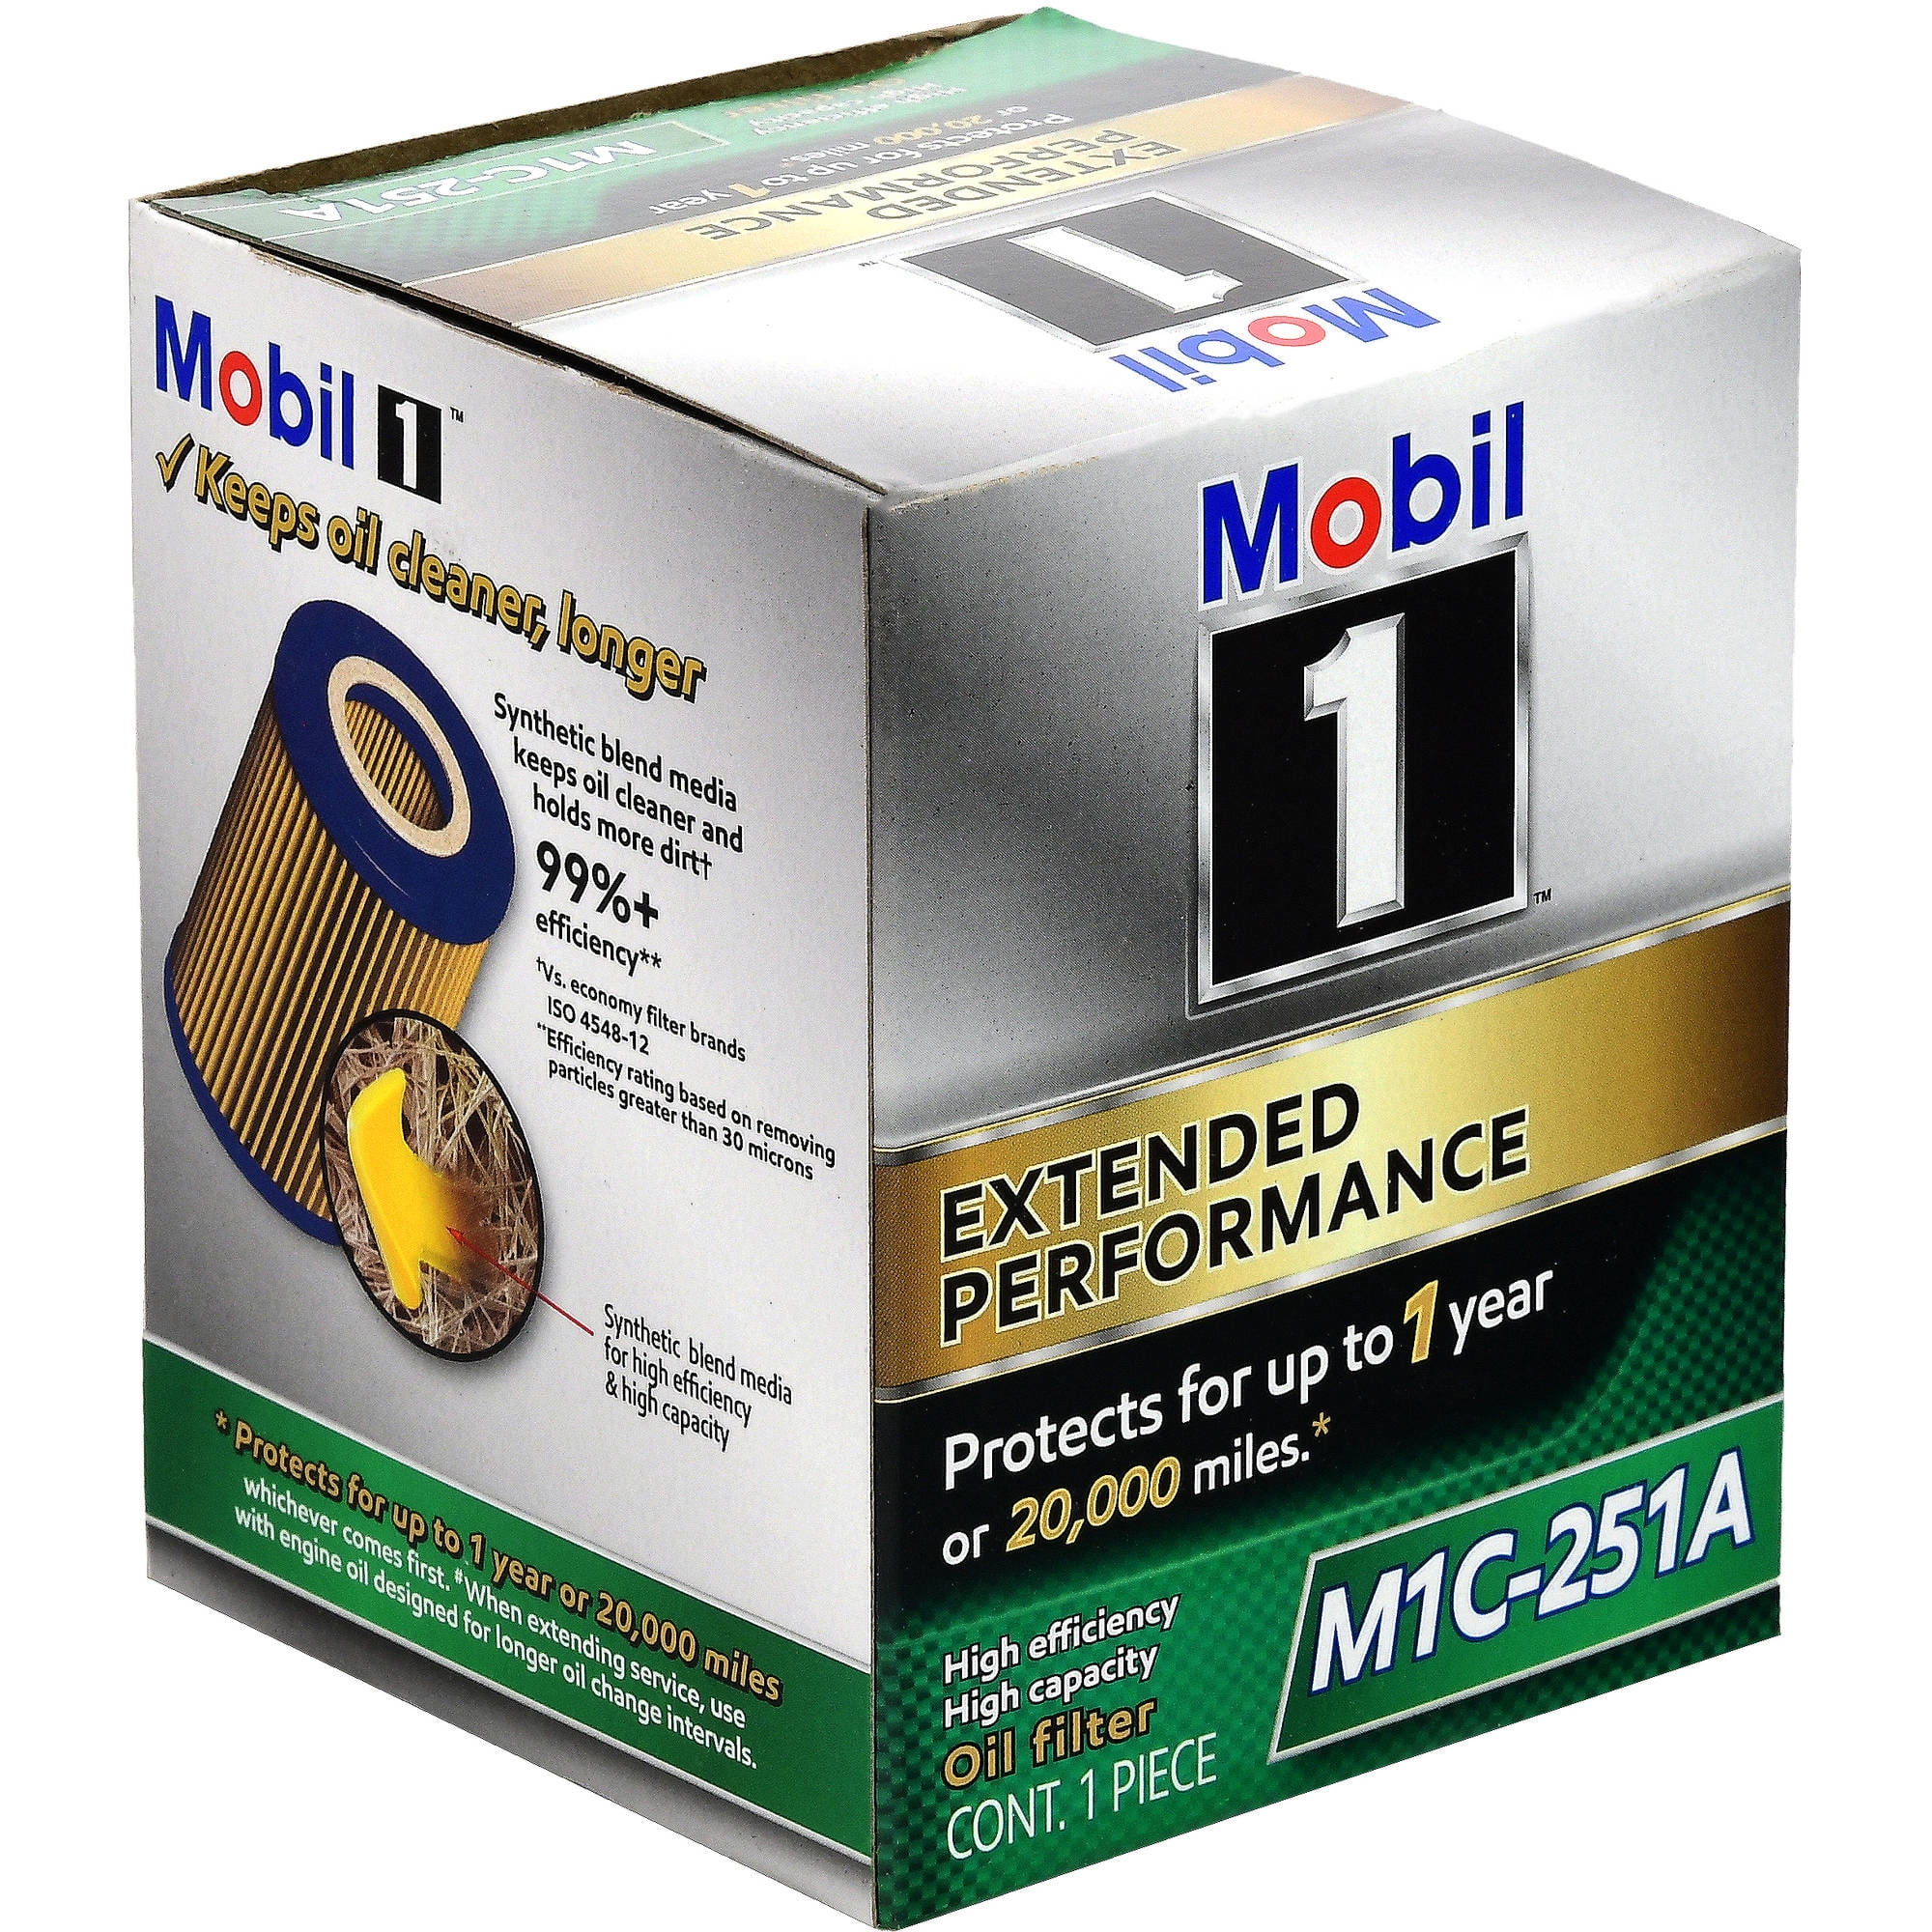 NEW Mobil 1 Extended Performance High Efficiency//Capacity Oil Filter M1C-257A